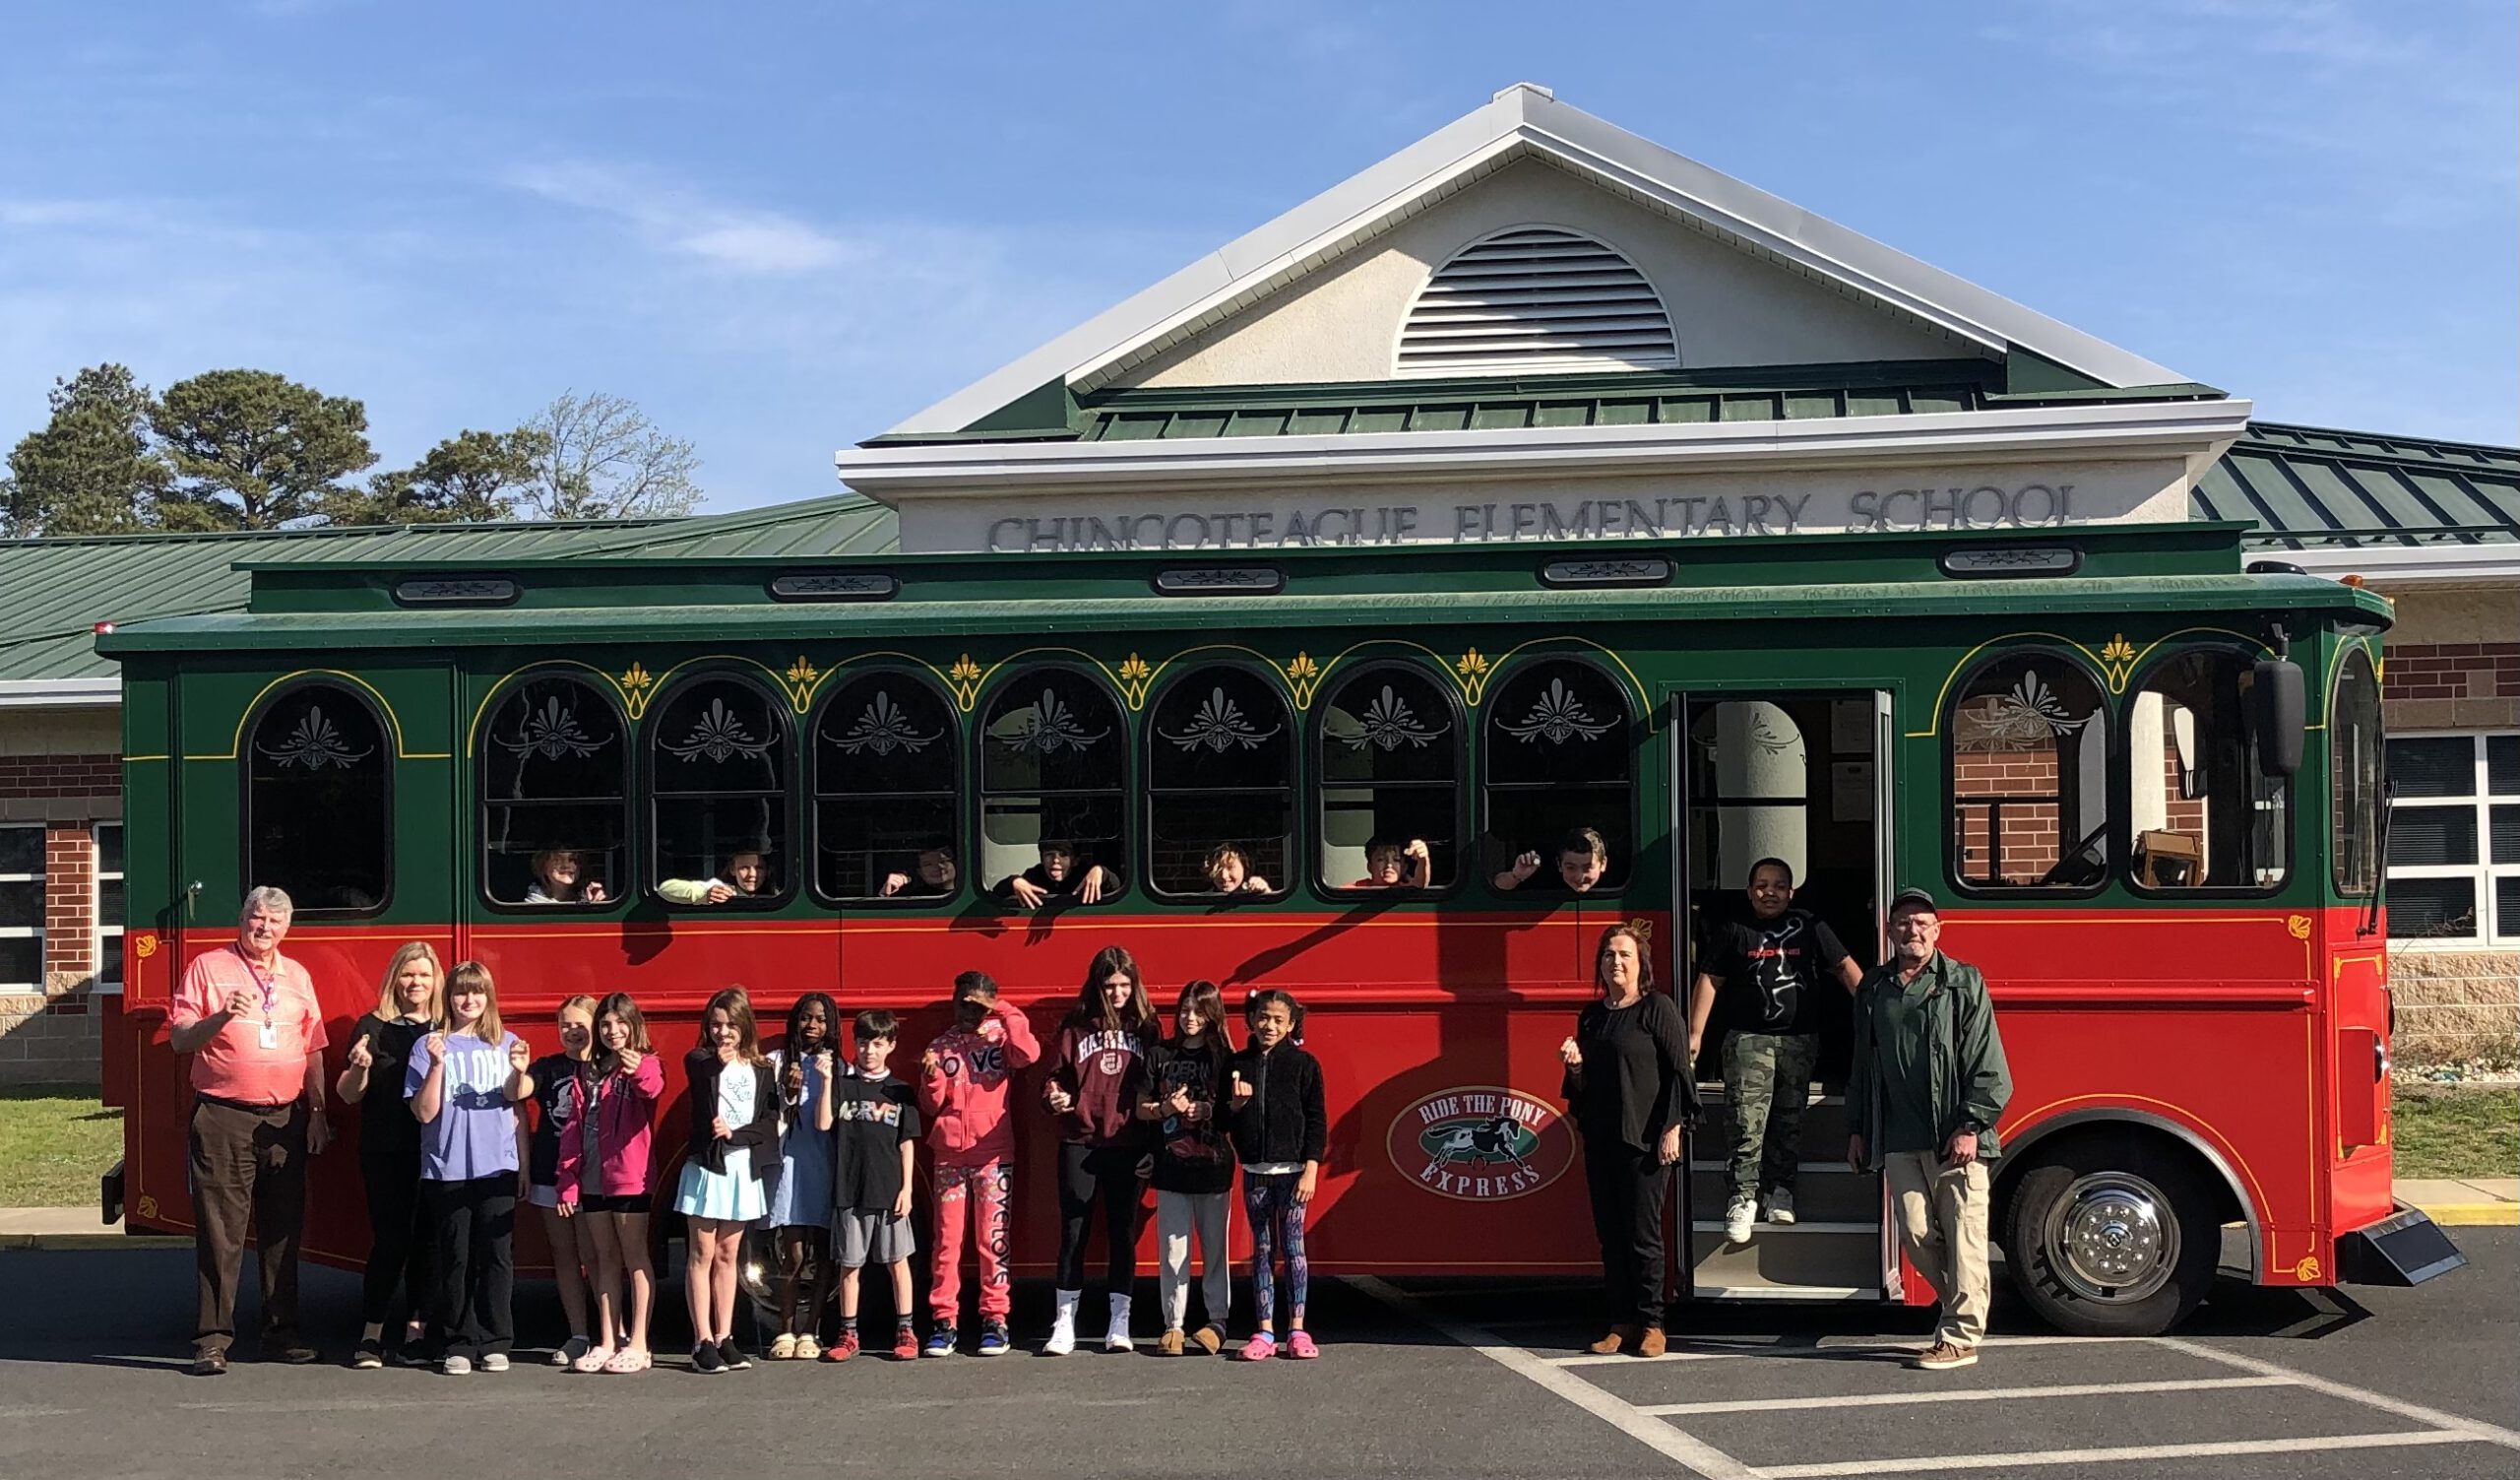 The Pony Express News: The New Trolley Has Been Named